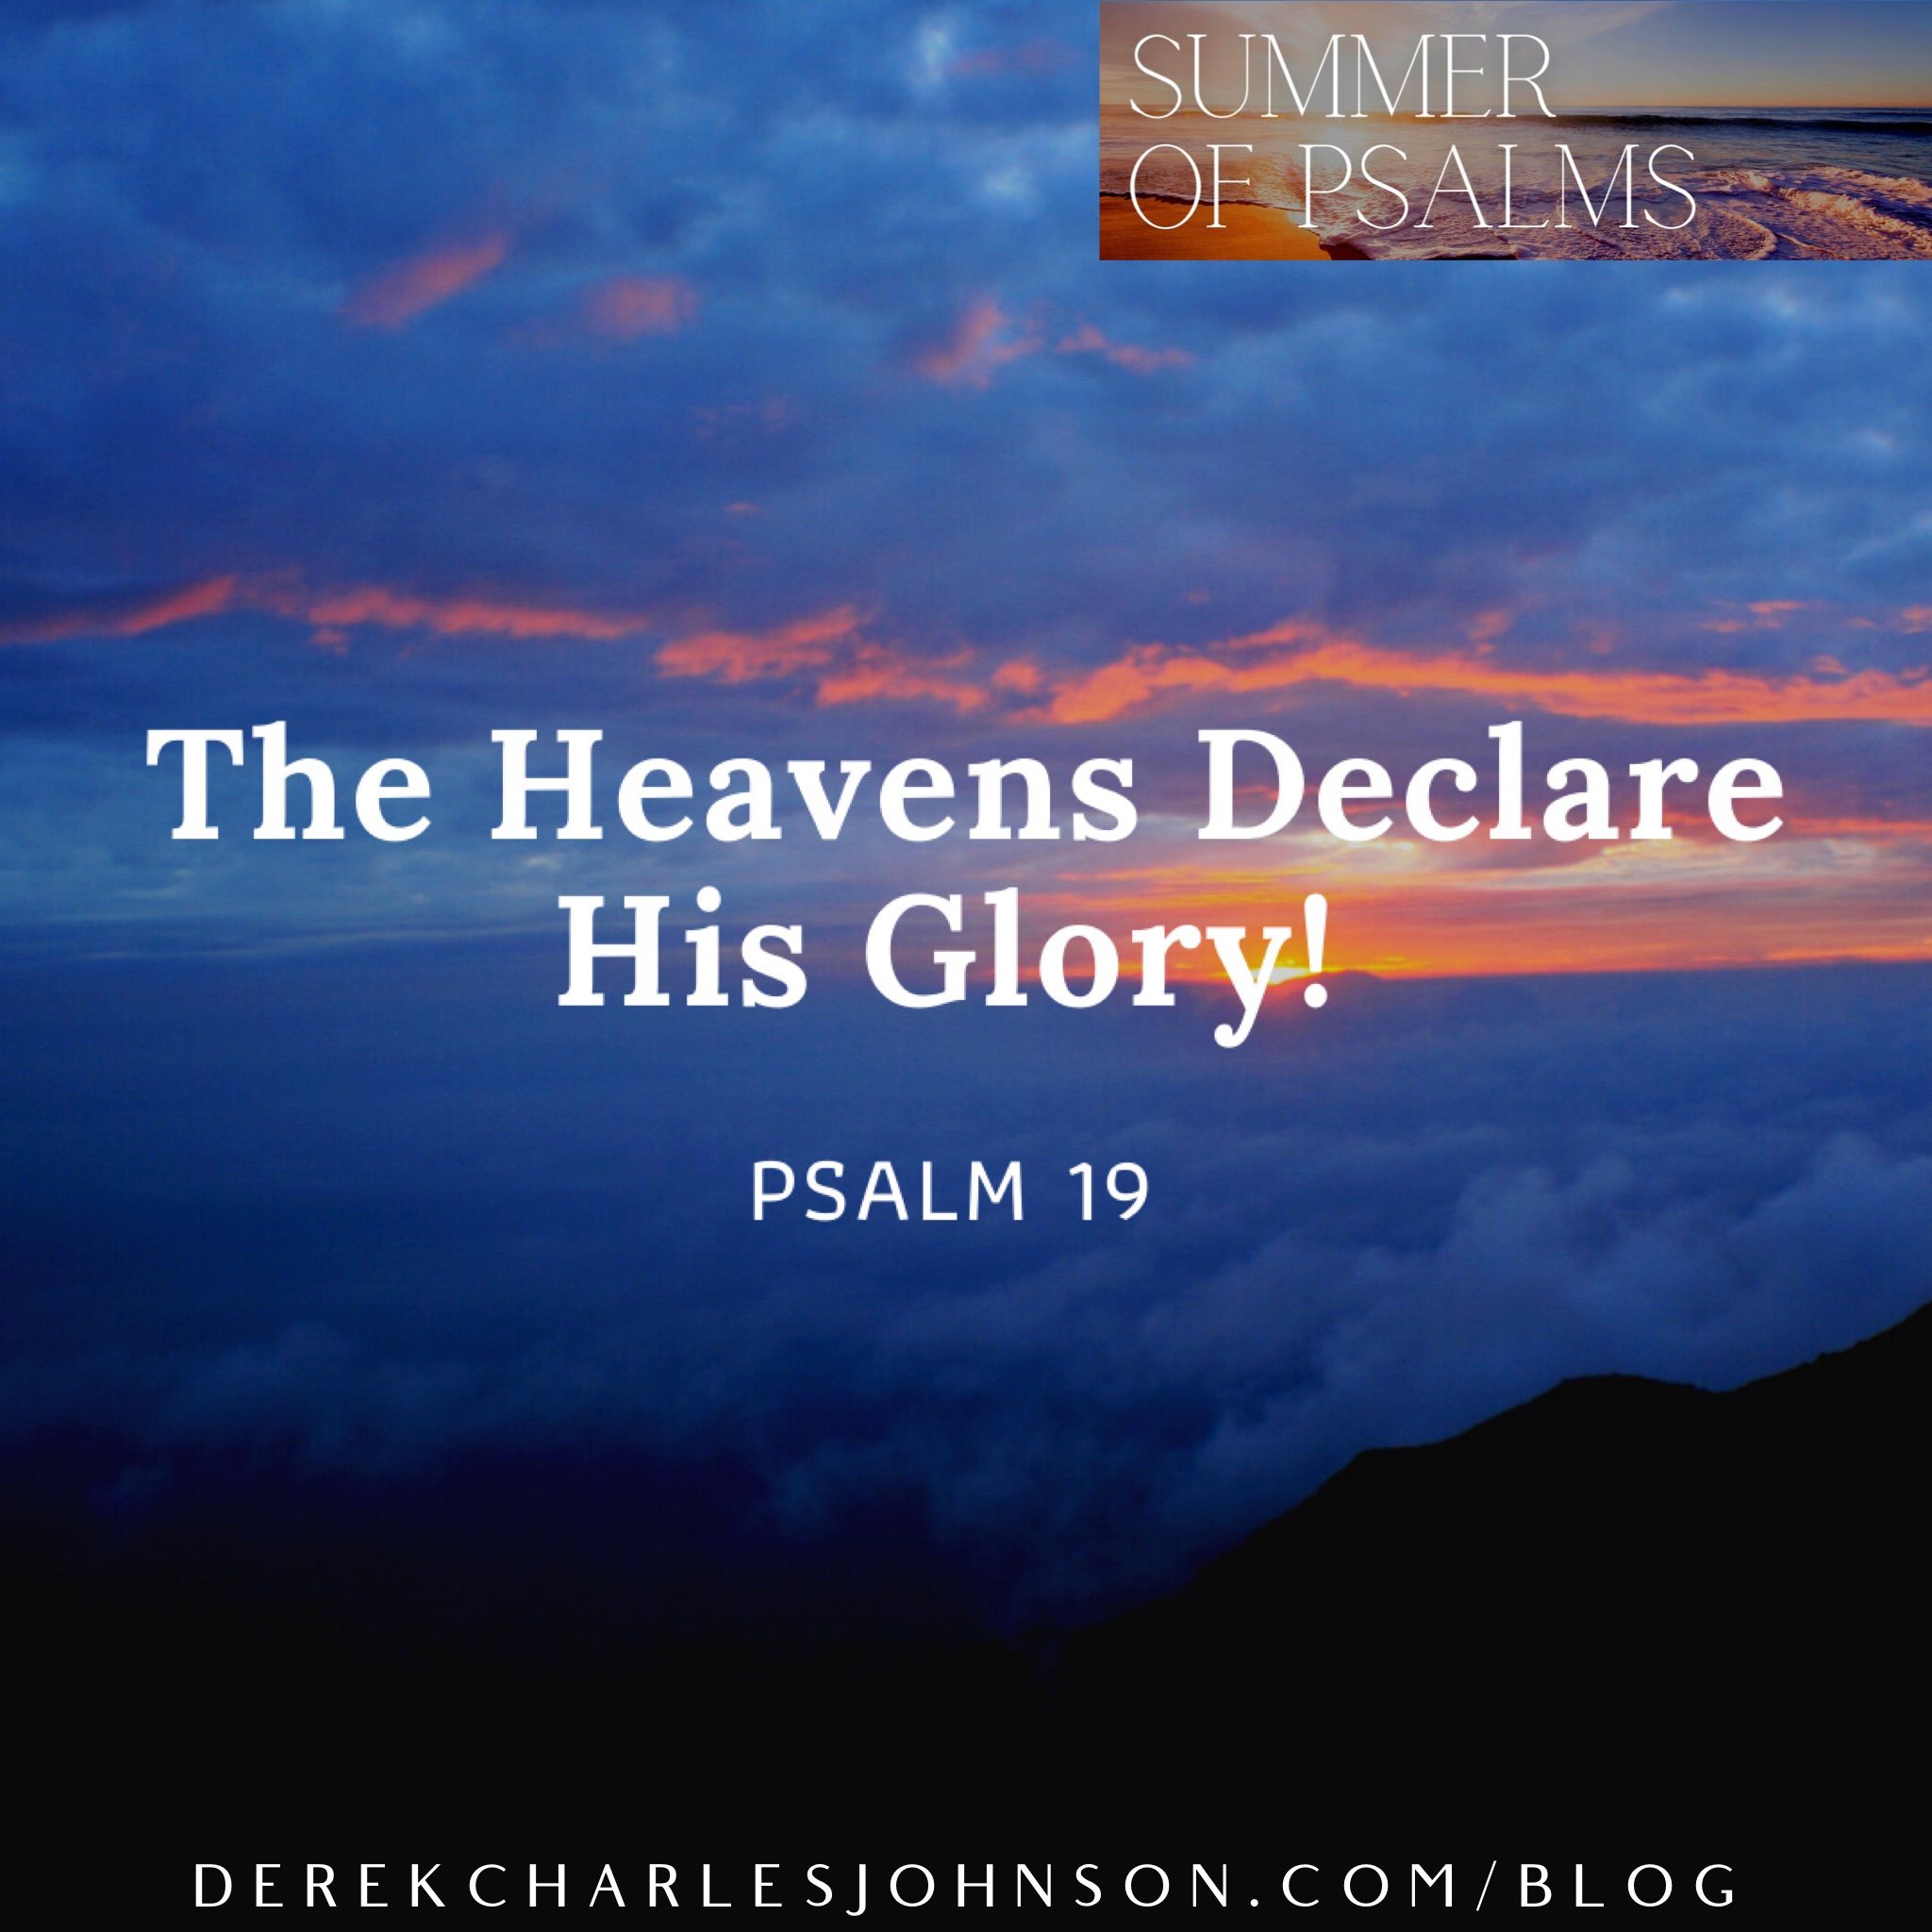 The Heavens Declare the Glory of God